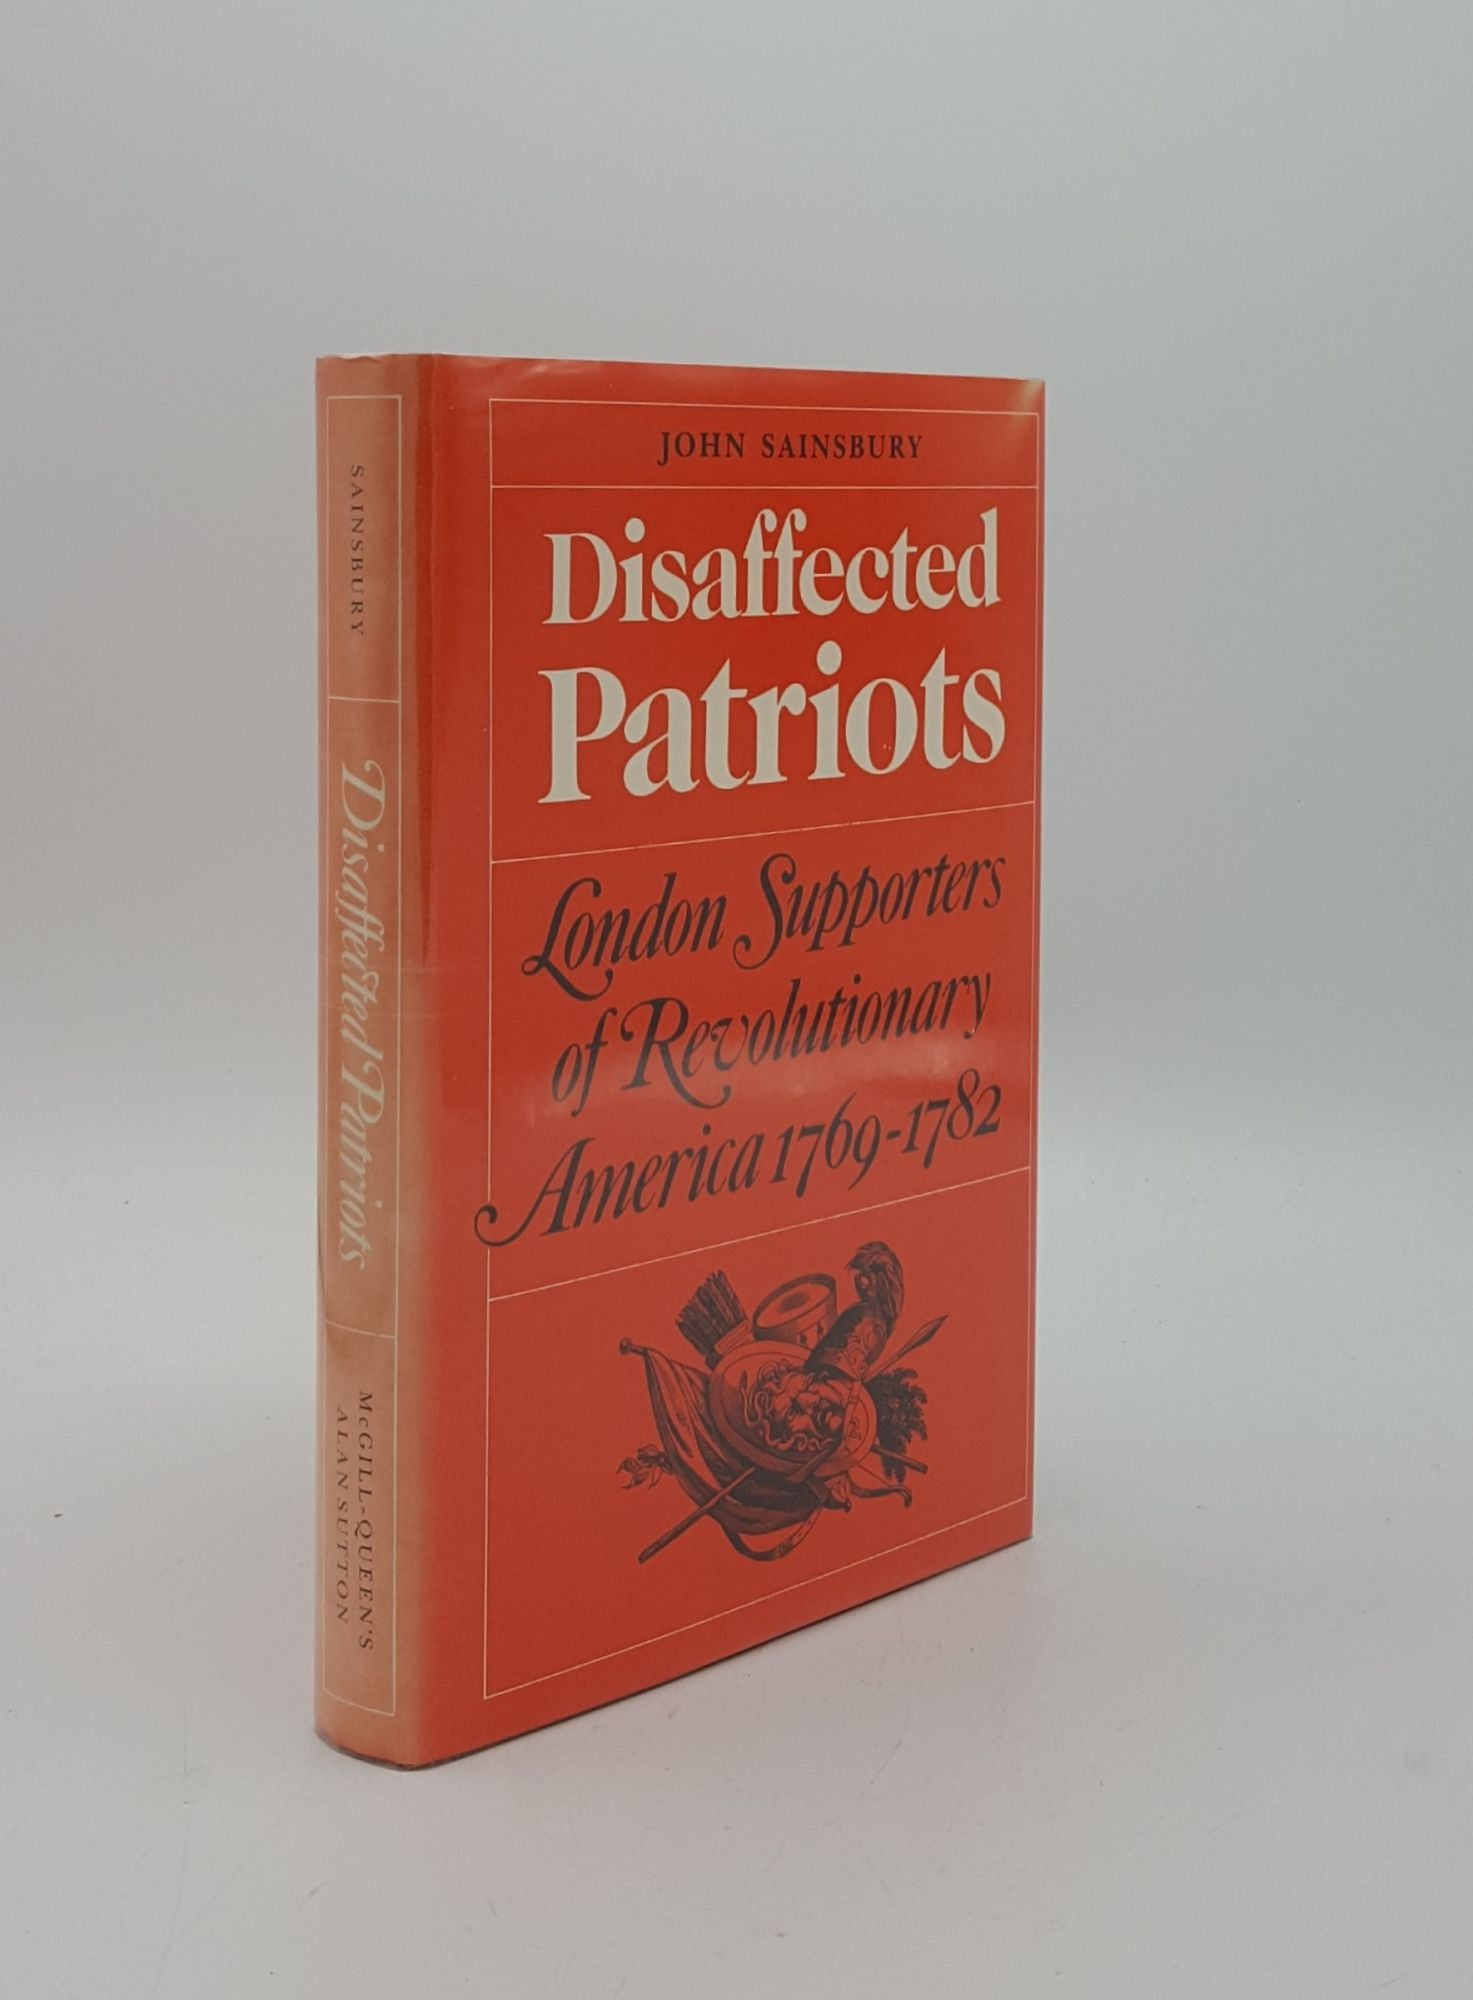 SAINSBURY John A. - Disaffected Patriots London Supporters of Revolutionary America 1769 - 1782